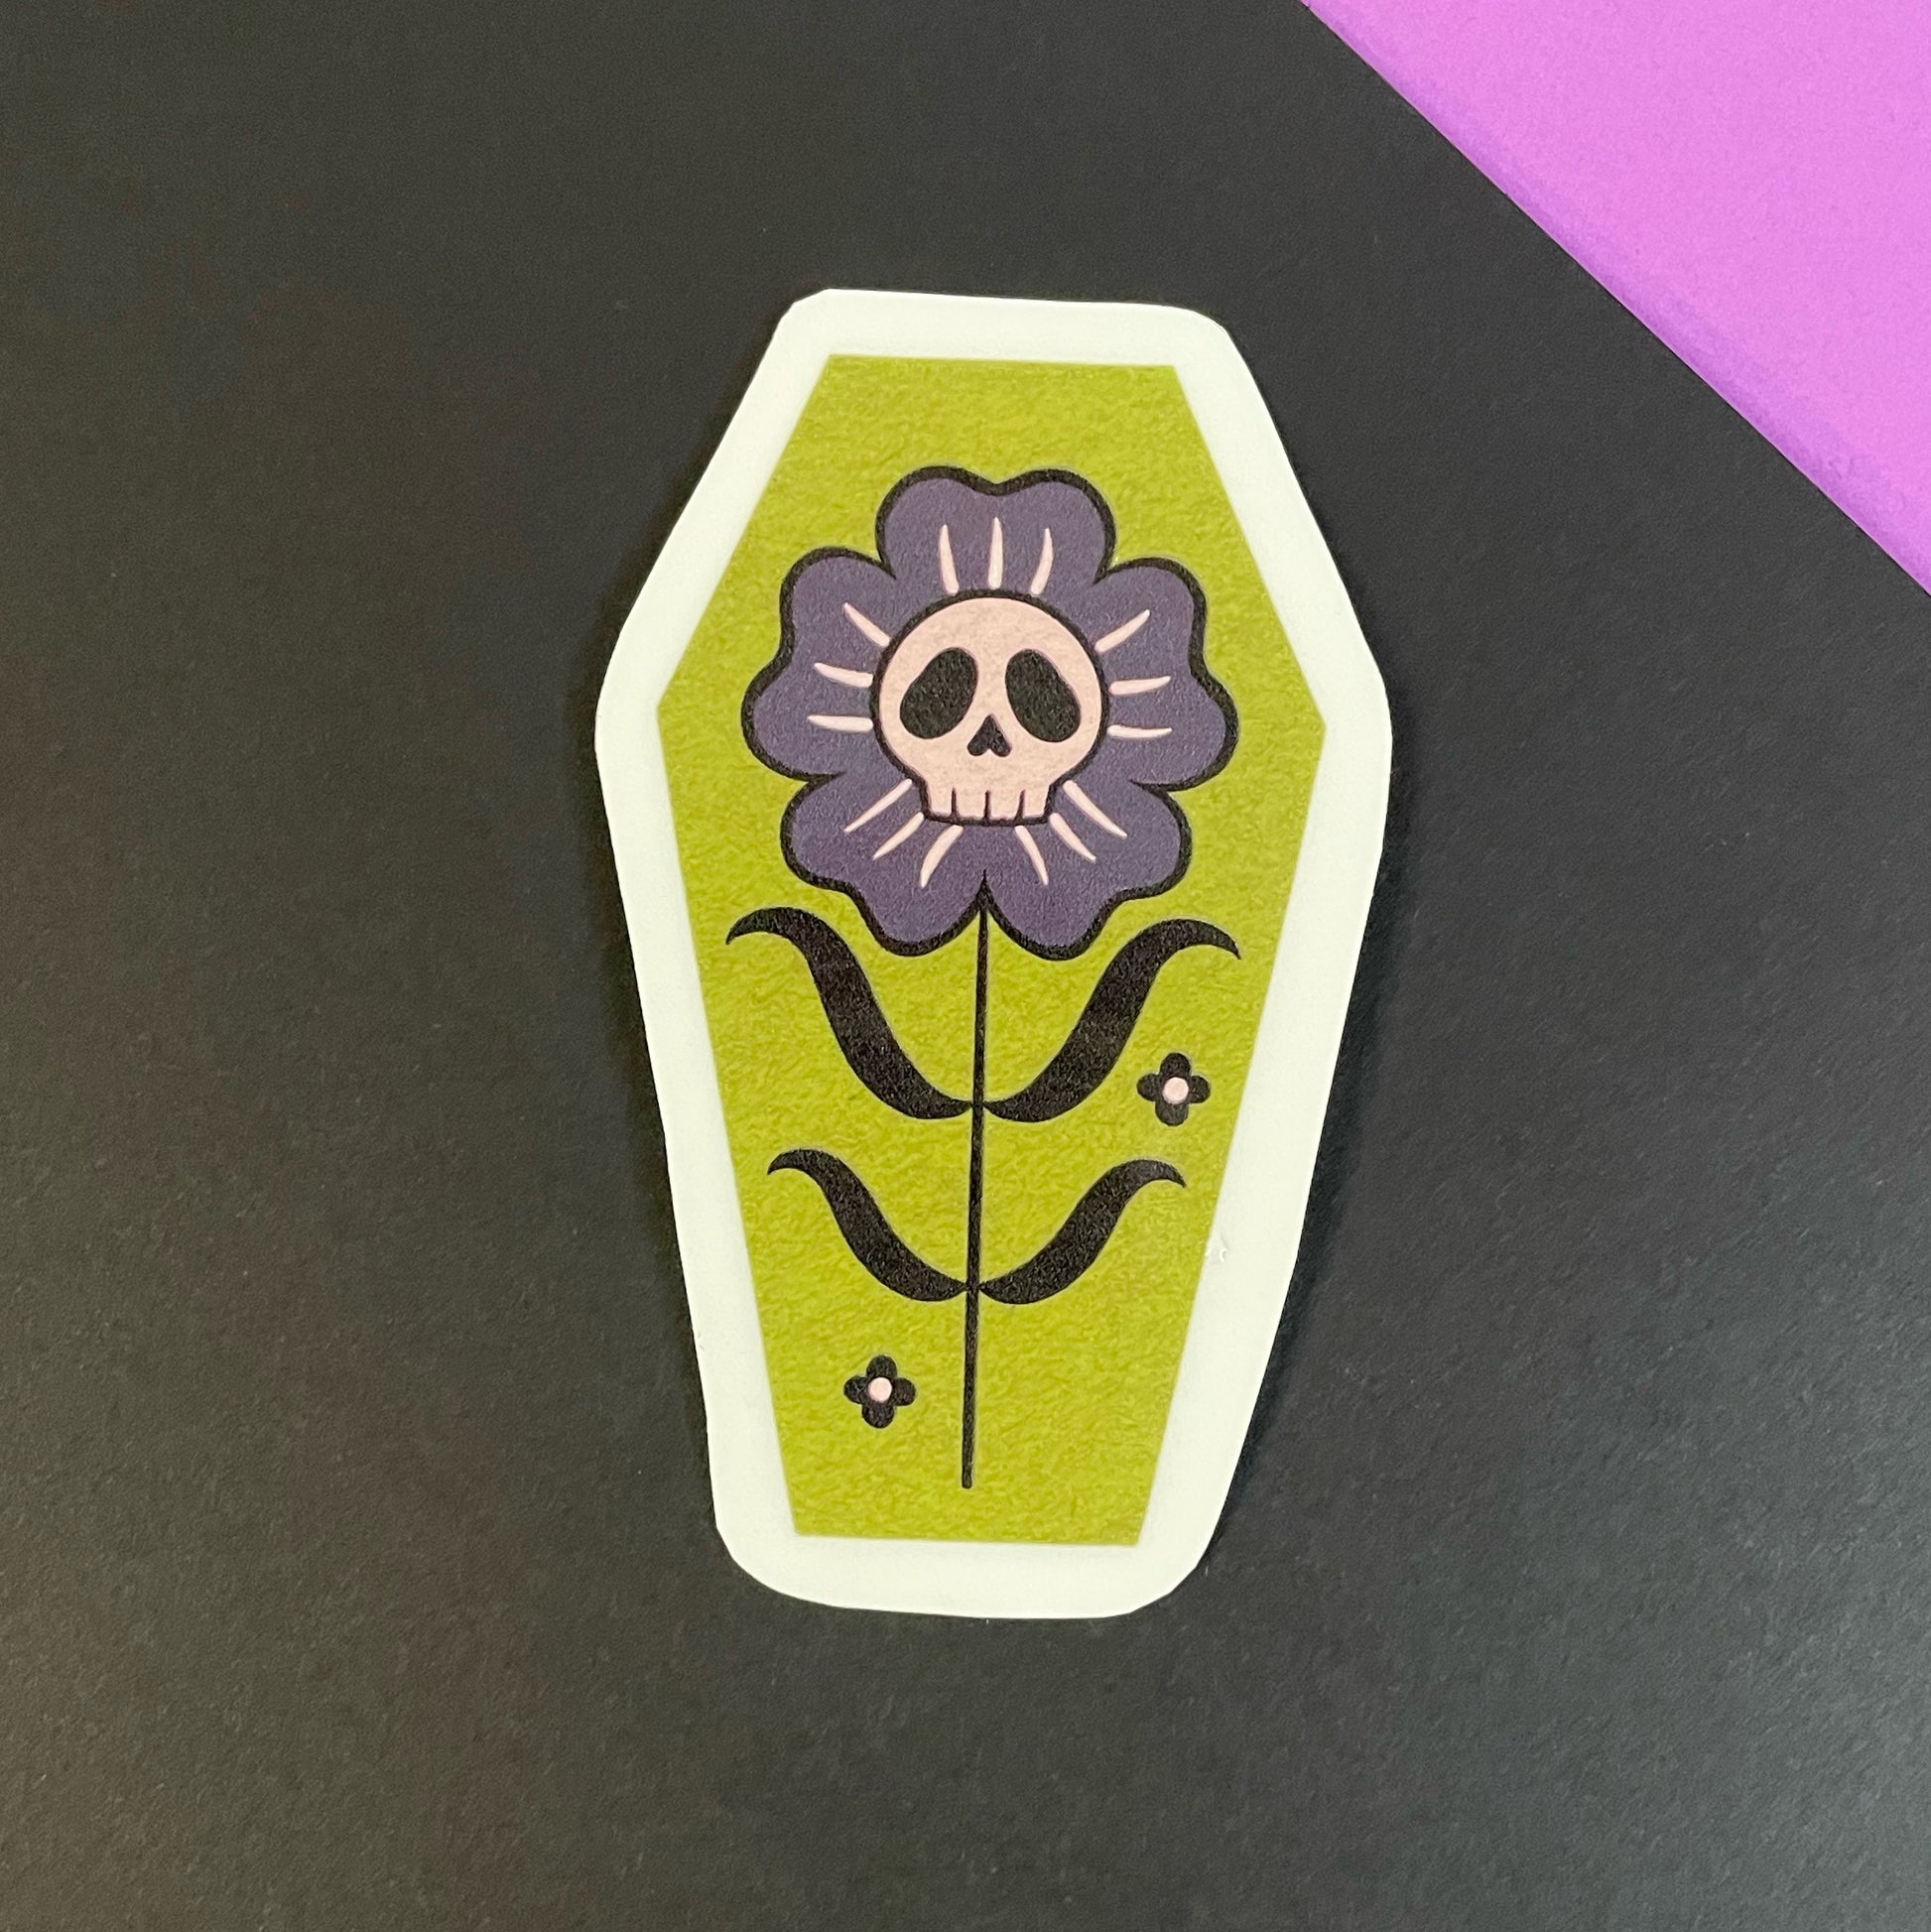 A coffin shaped sticker with a green background, featuring a black and gray flower with a skull in the center.